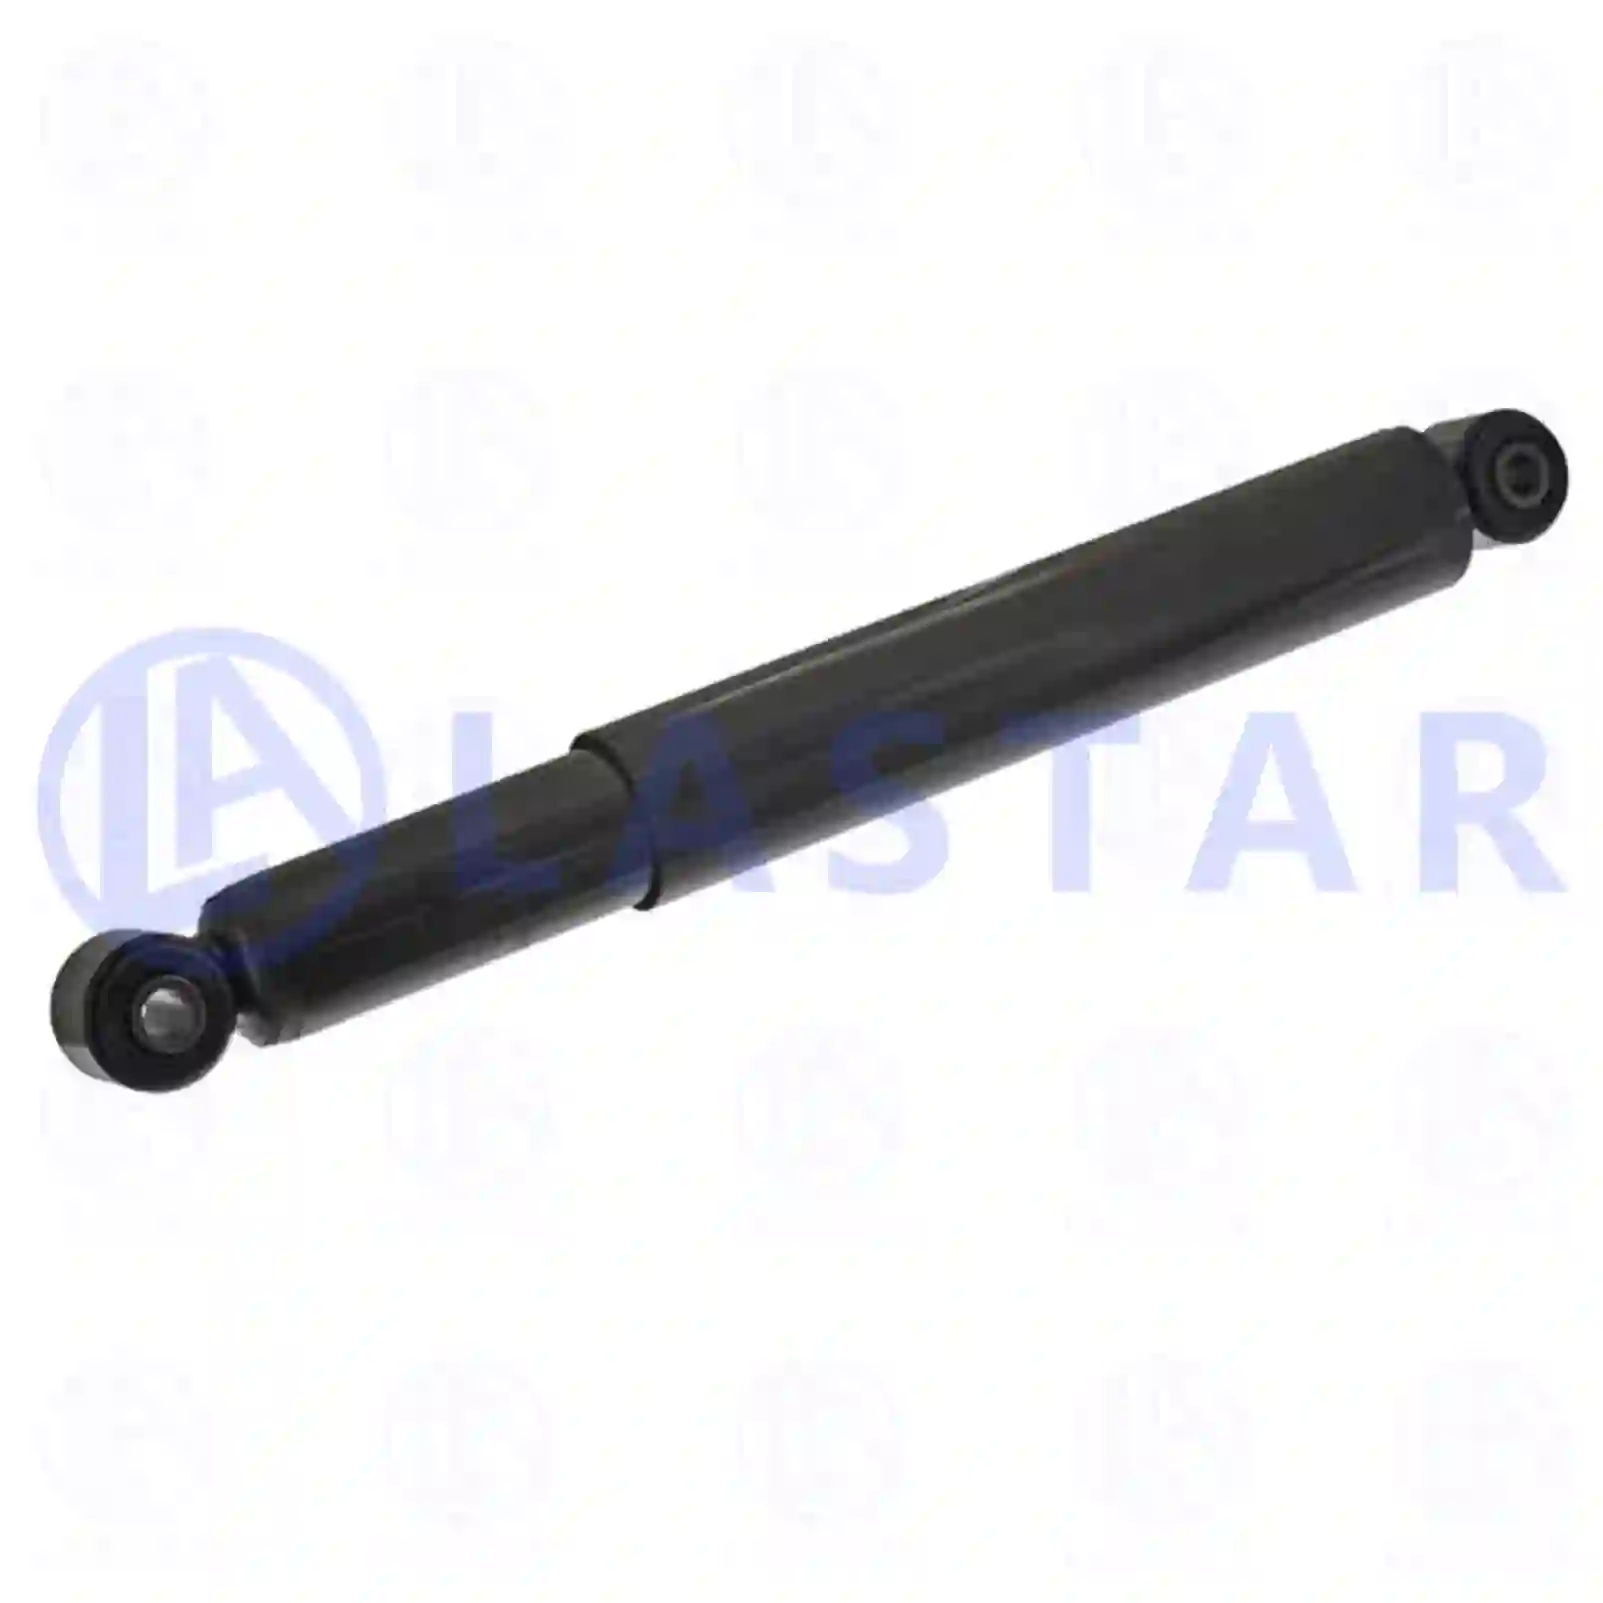 Shock absorber, 77727845, 0063235400, ZG41590-0008, , , ||  77727845 Lastar Spare Part | Truck Spare Parts, Auotomotive Spare Parts Shock absorber, 77727845, 0063235400, ZG41590-0008, , , ||  77727845 Lastar Spare Part | Truck Spare Parts, Auotomotive Spare Parts